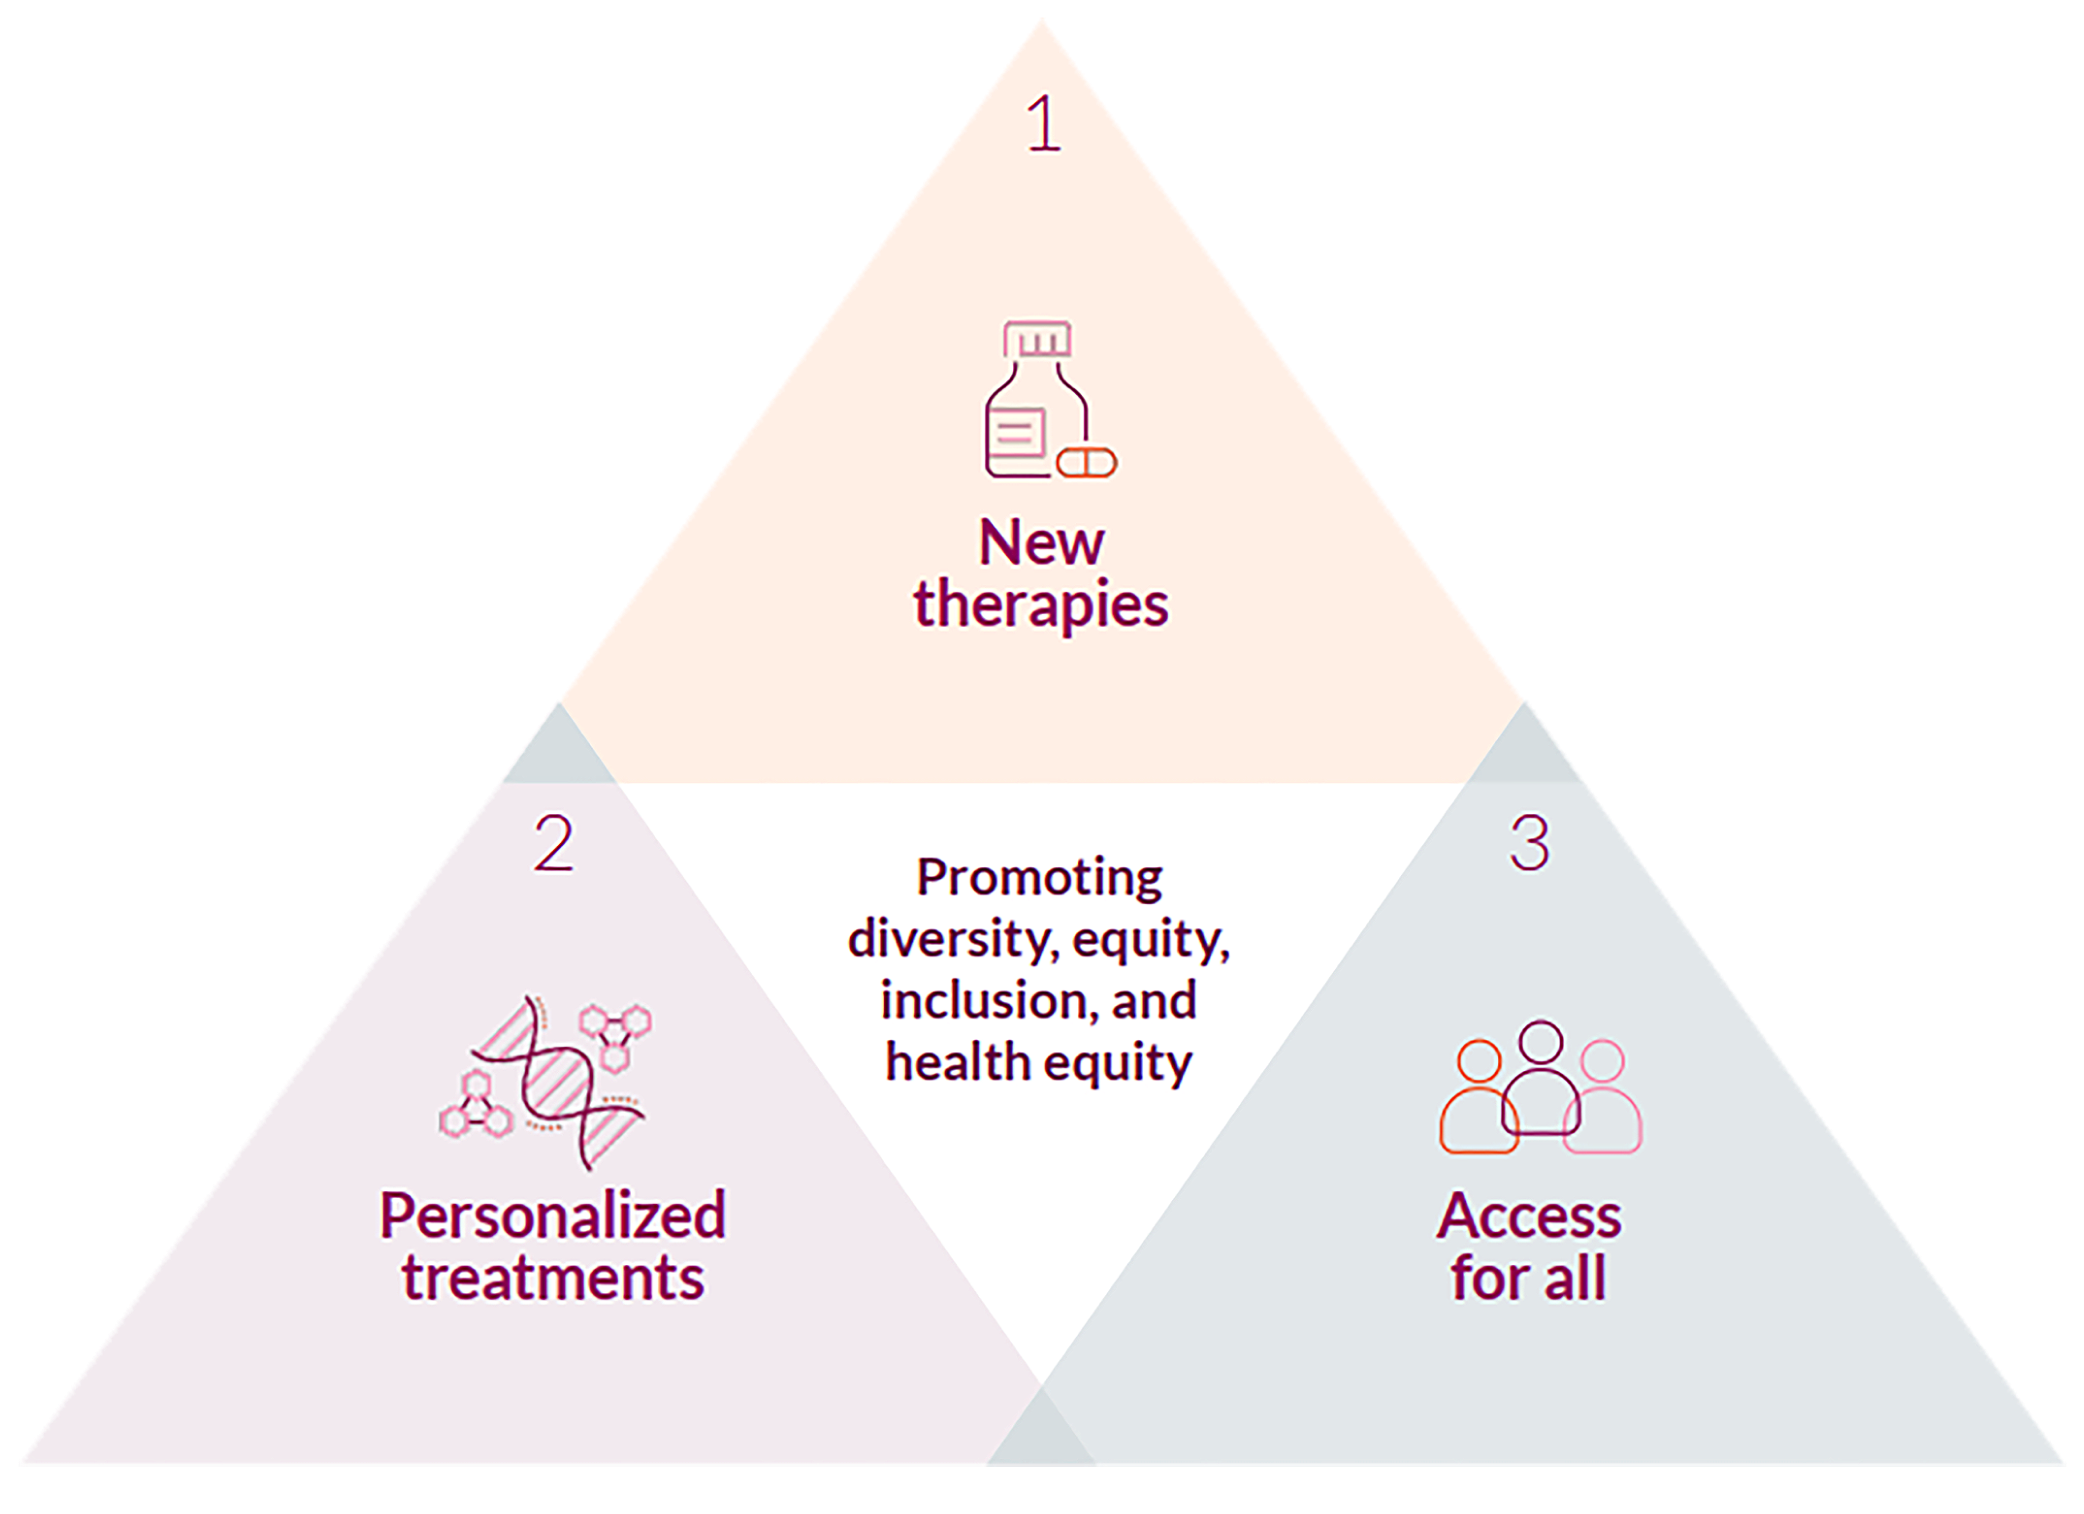 Pyramid diagram showing new therapies, personalized treatments, and access for all promoting diversity, equity, inclusion, and health equity.